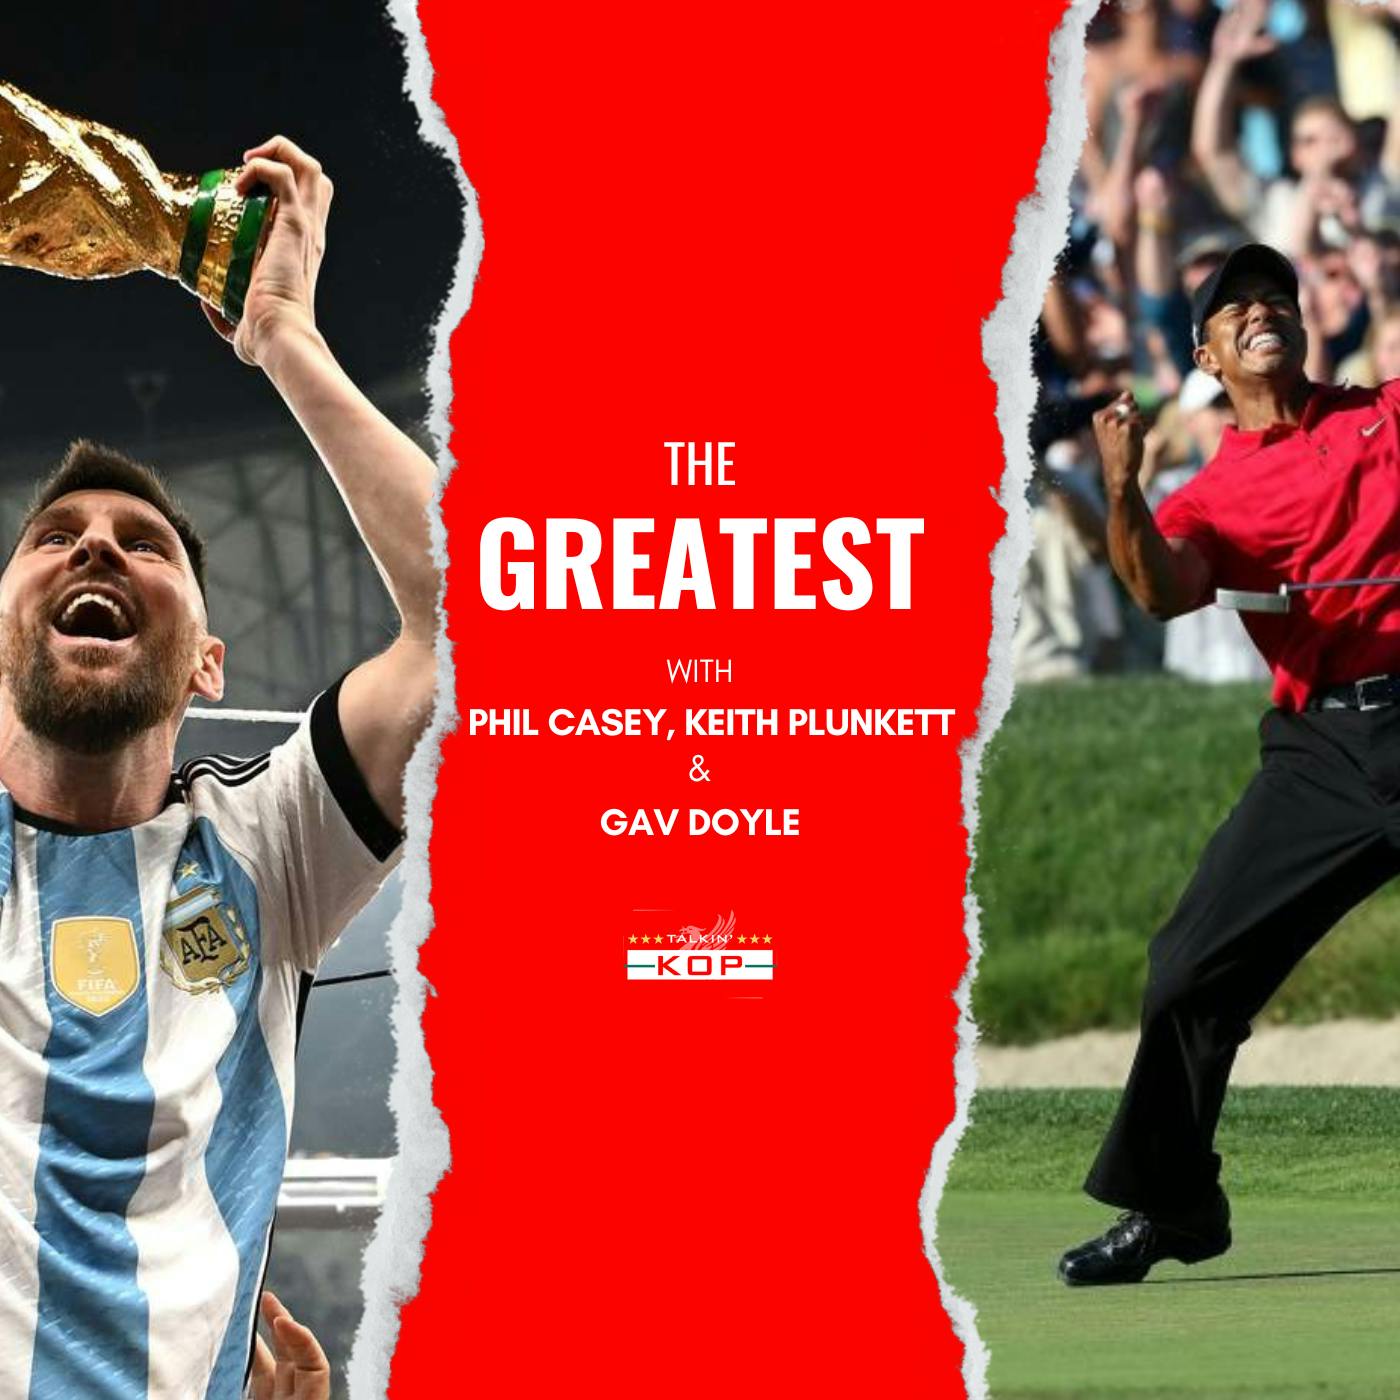 The Greatest | Episode 1 | Football and Athletics